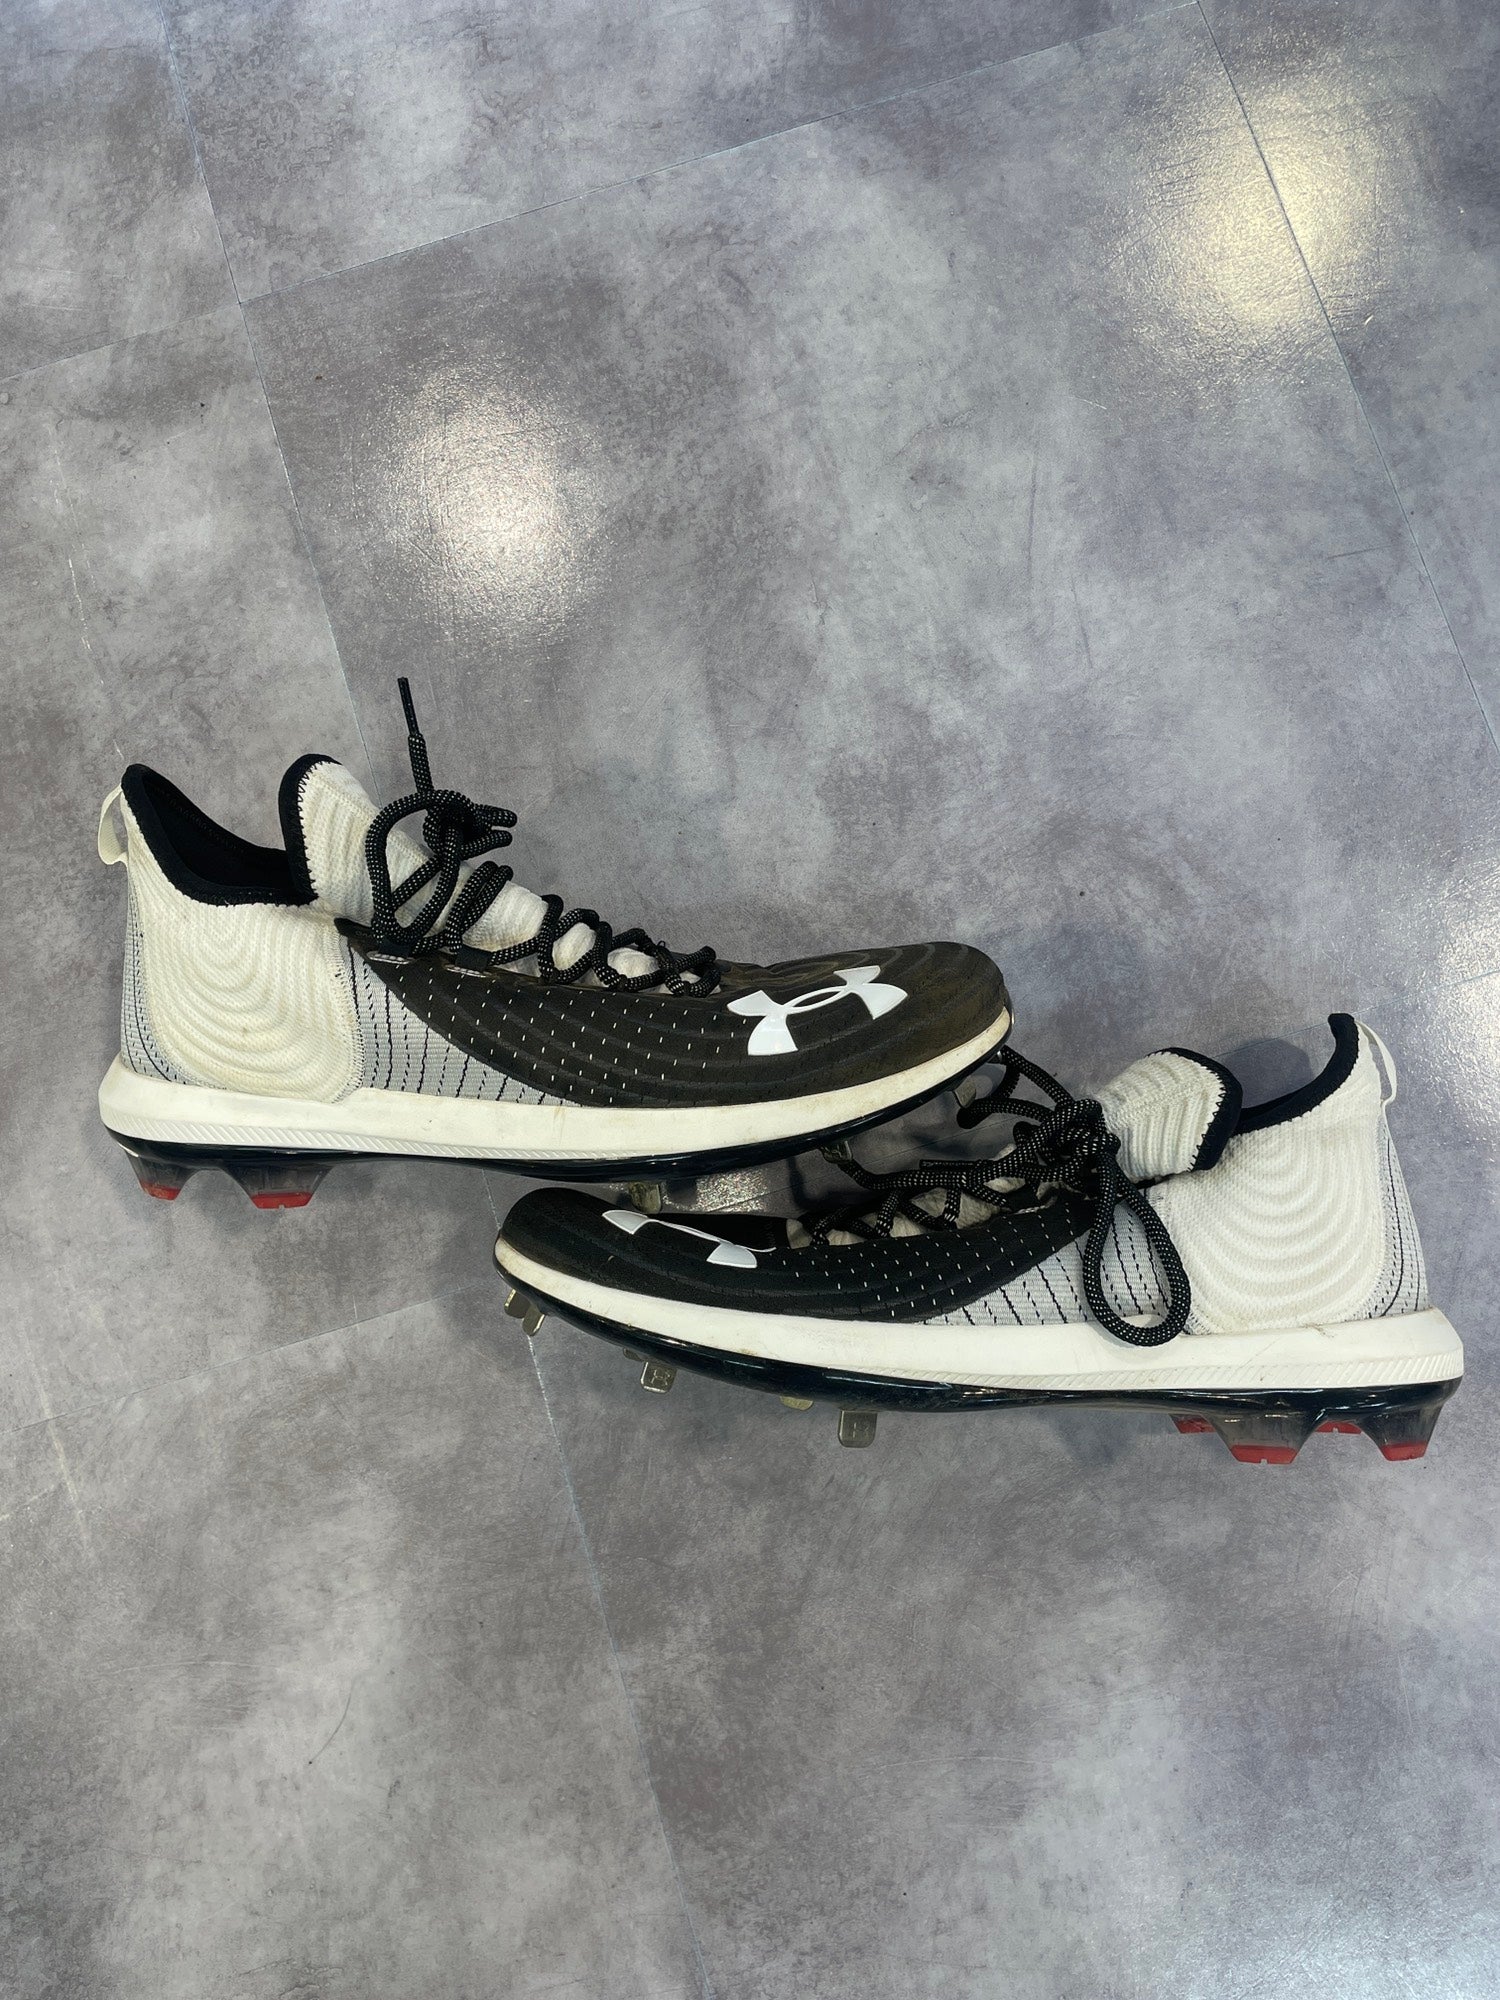 Under Armour Bryce Harper 4 Low Mens Metal Baseball Cleats, Comes